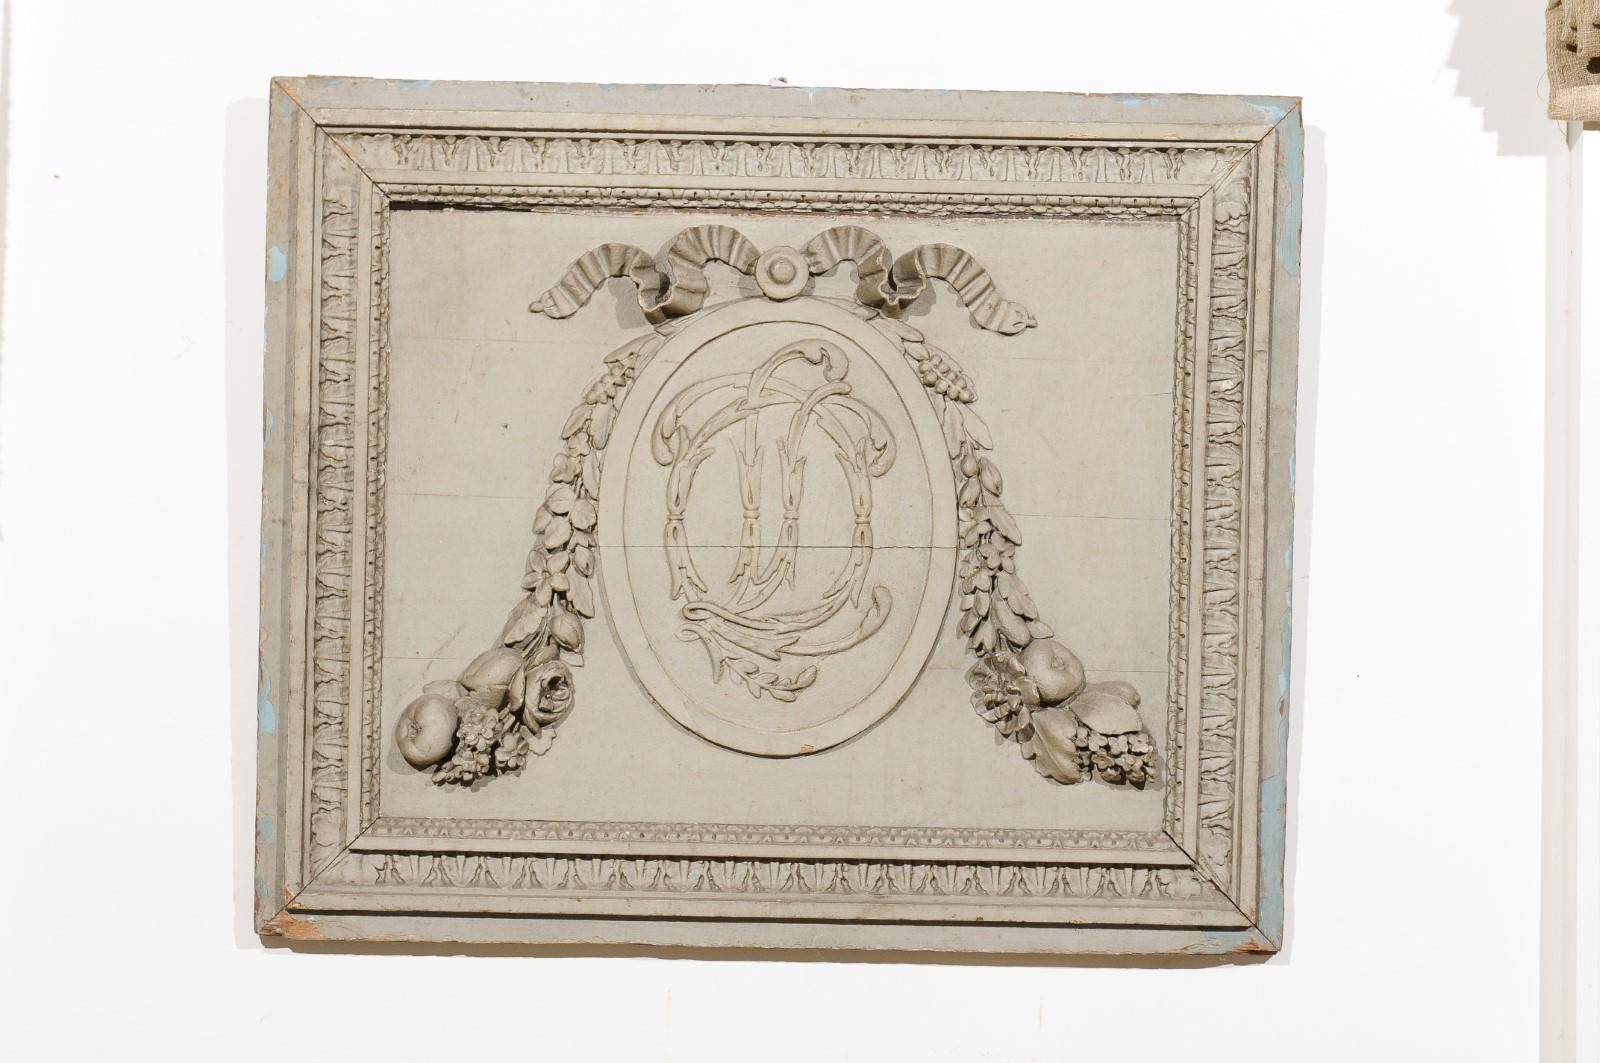 A French Louis XVI period painted and hand carved wooden boiseries panel from the late 18th century, with monogram, swag and fruit motifs. Born in France during the second half of the 18th century, this exquisite painted boiseries features a central